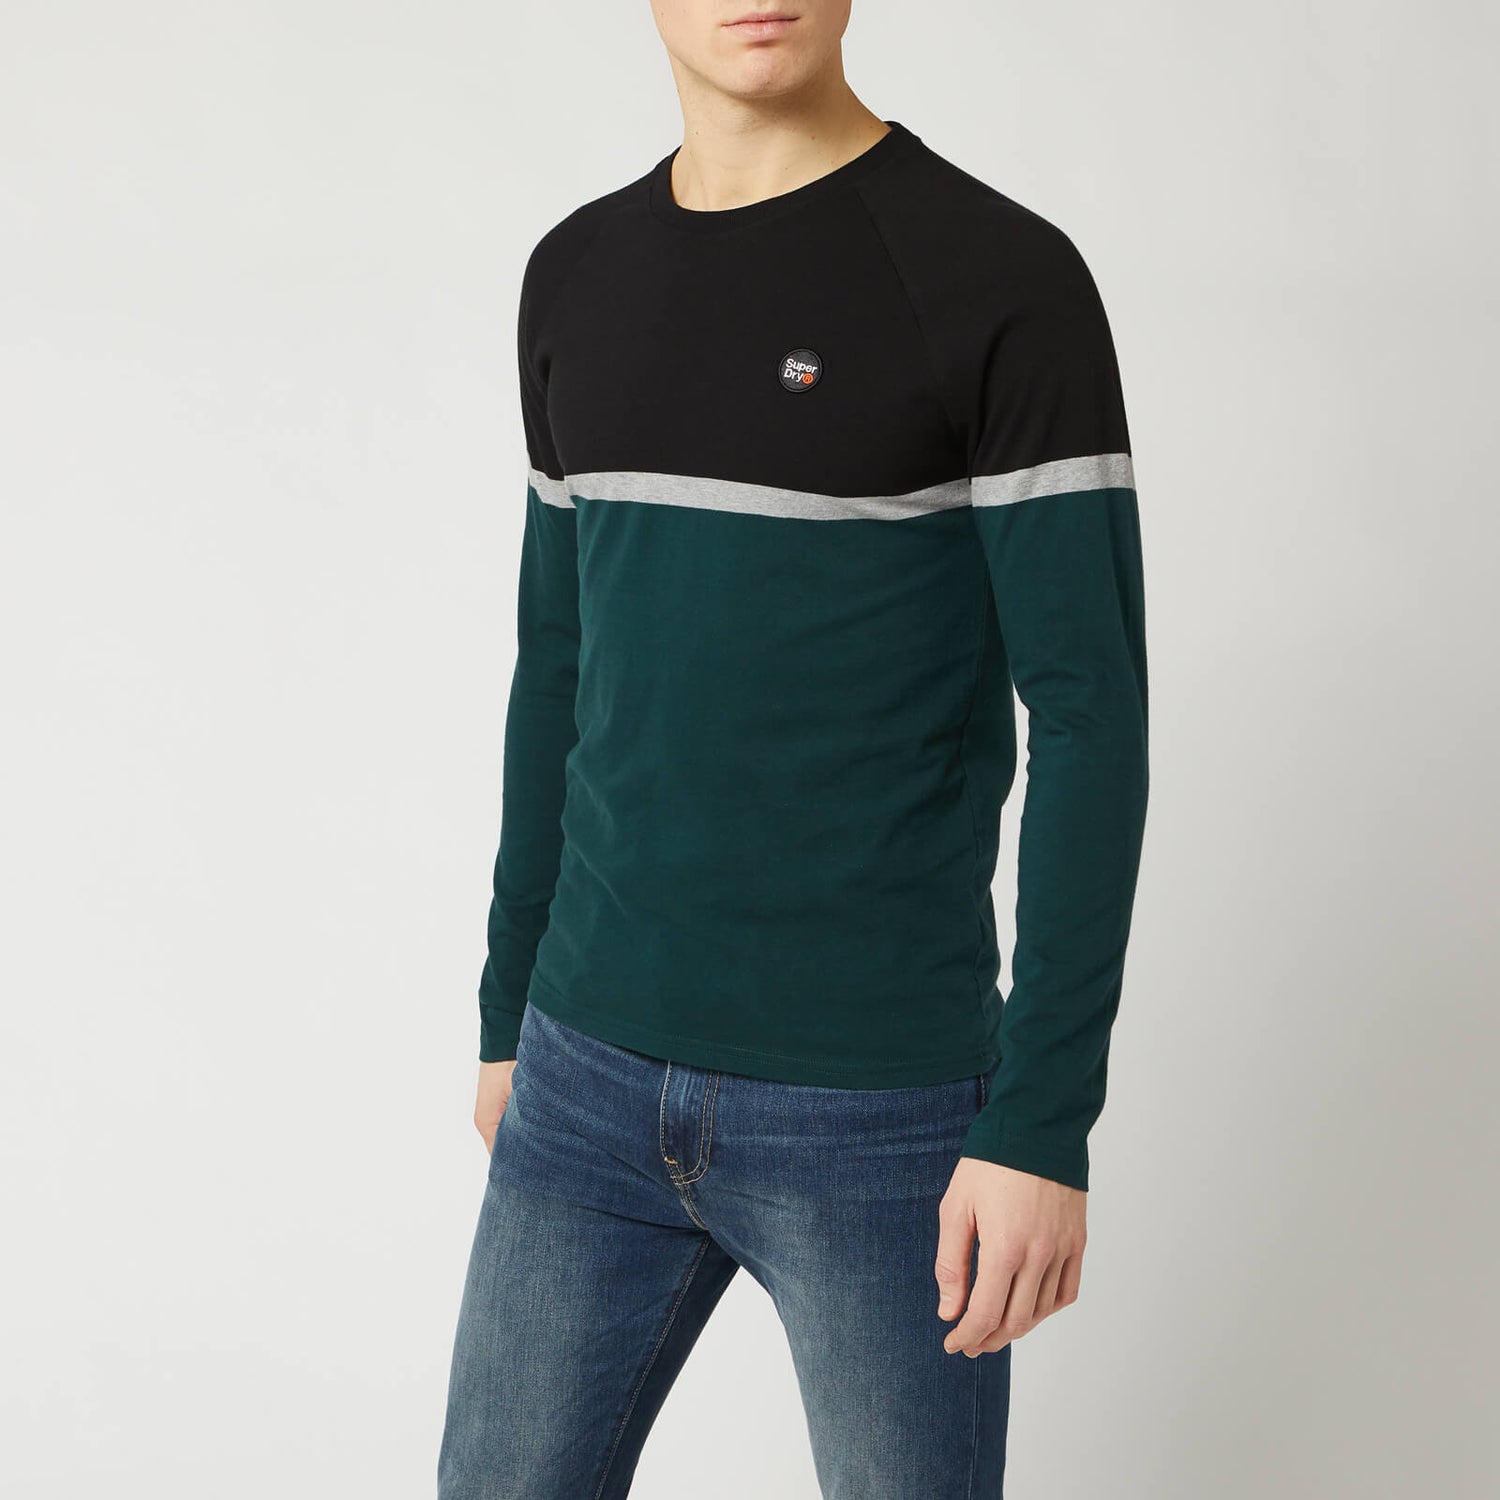 Superdry Mens Collective Colour Block L/S Top Long Sleeve 